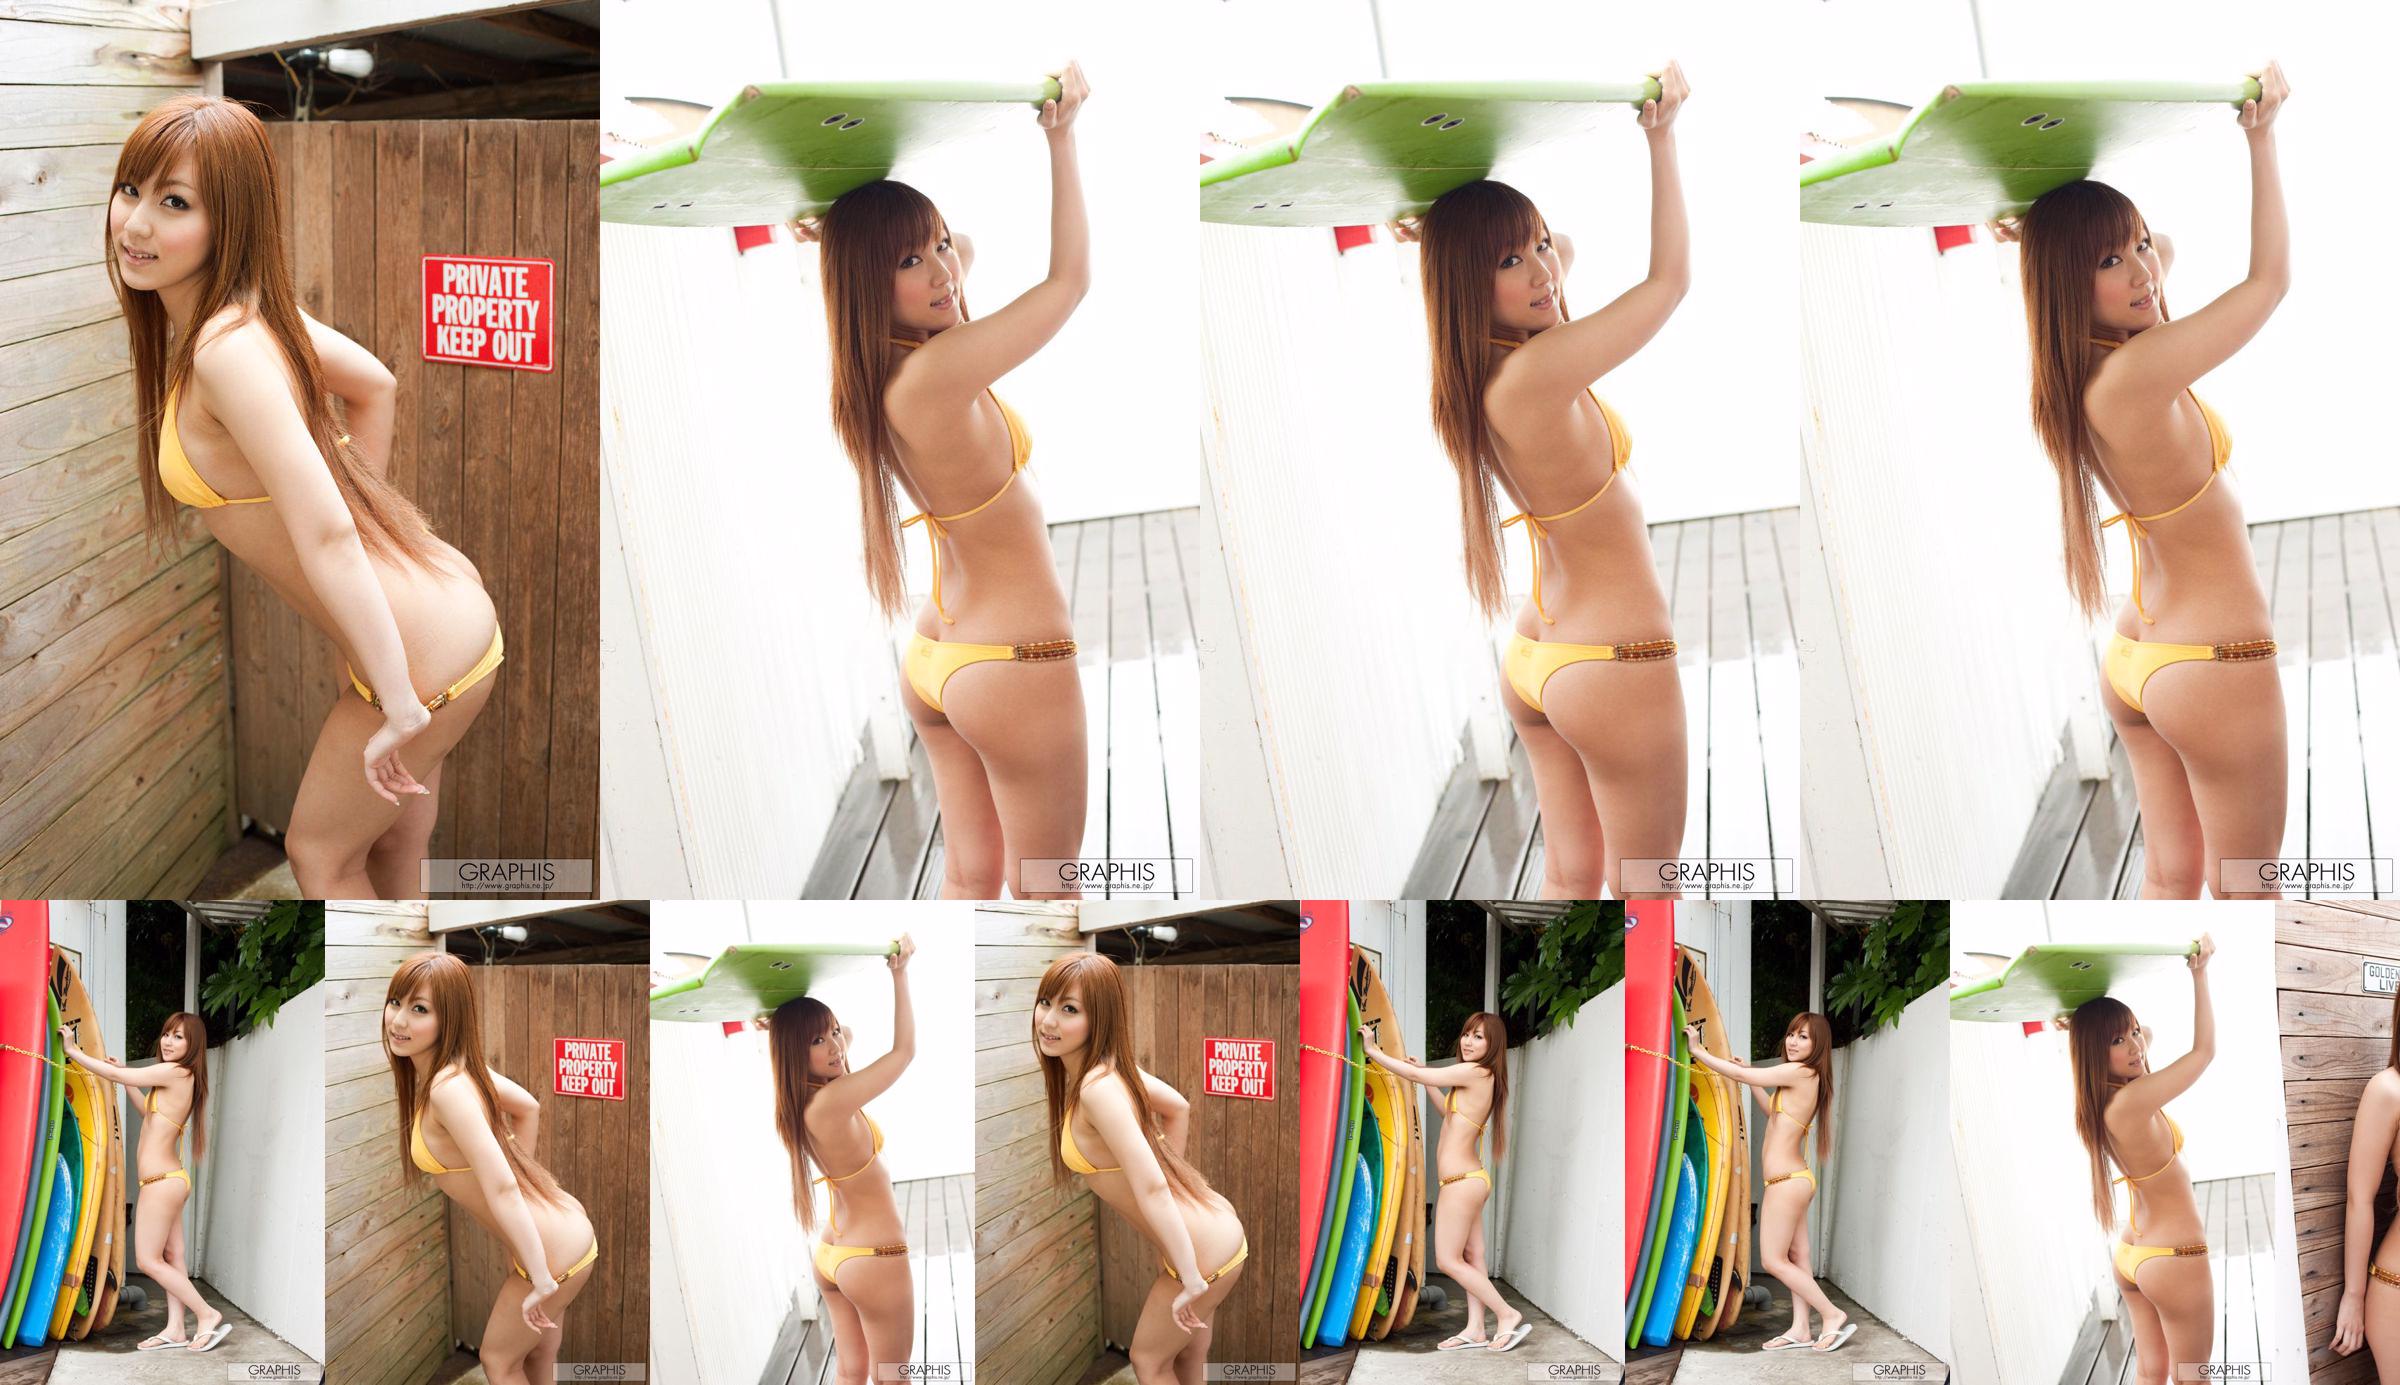 Ren Azumi / Kami Koi [Graphis] First Gravure First Take Off Fille No.c9bd5f Page 1